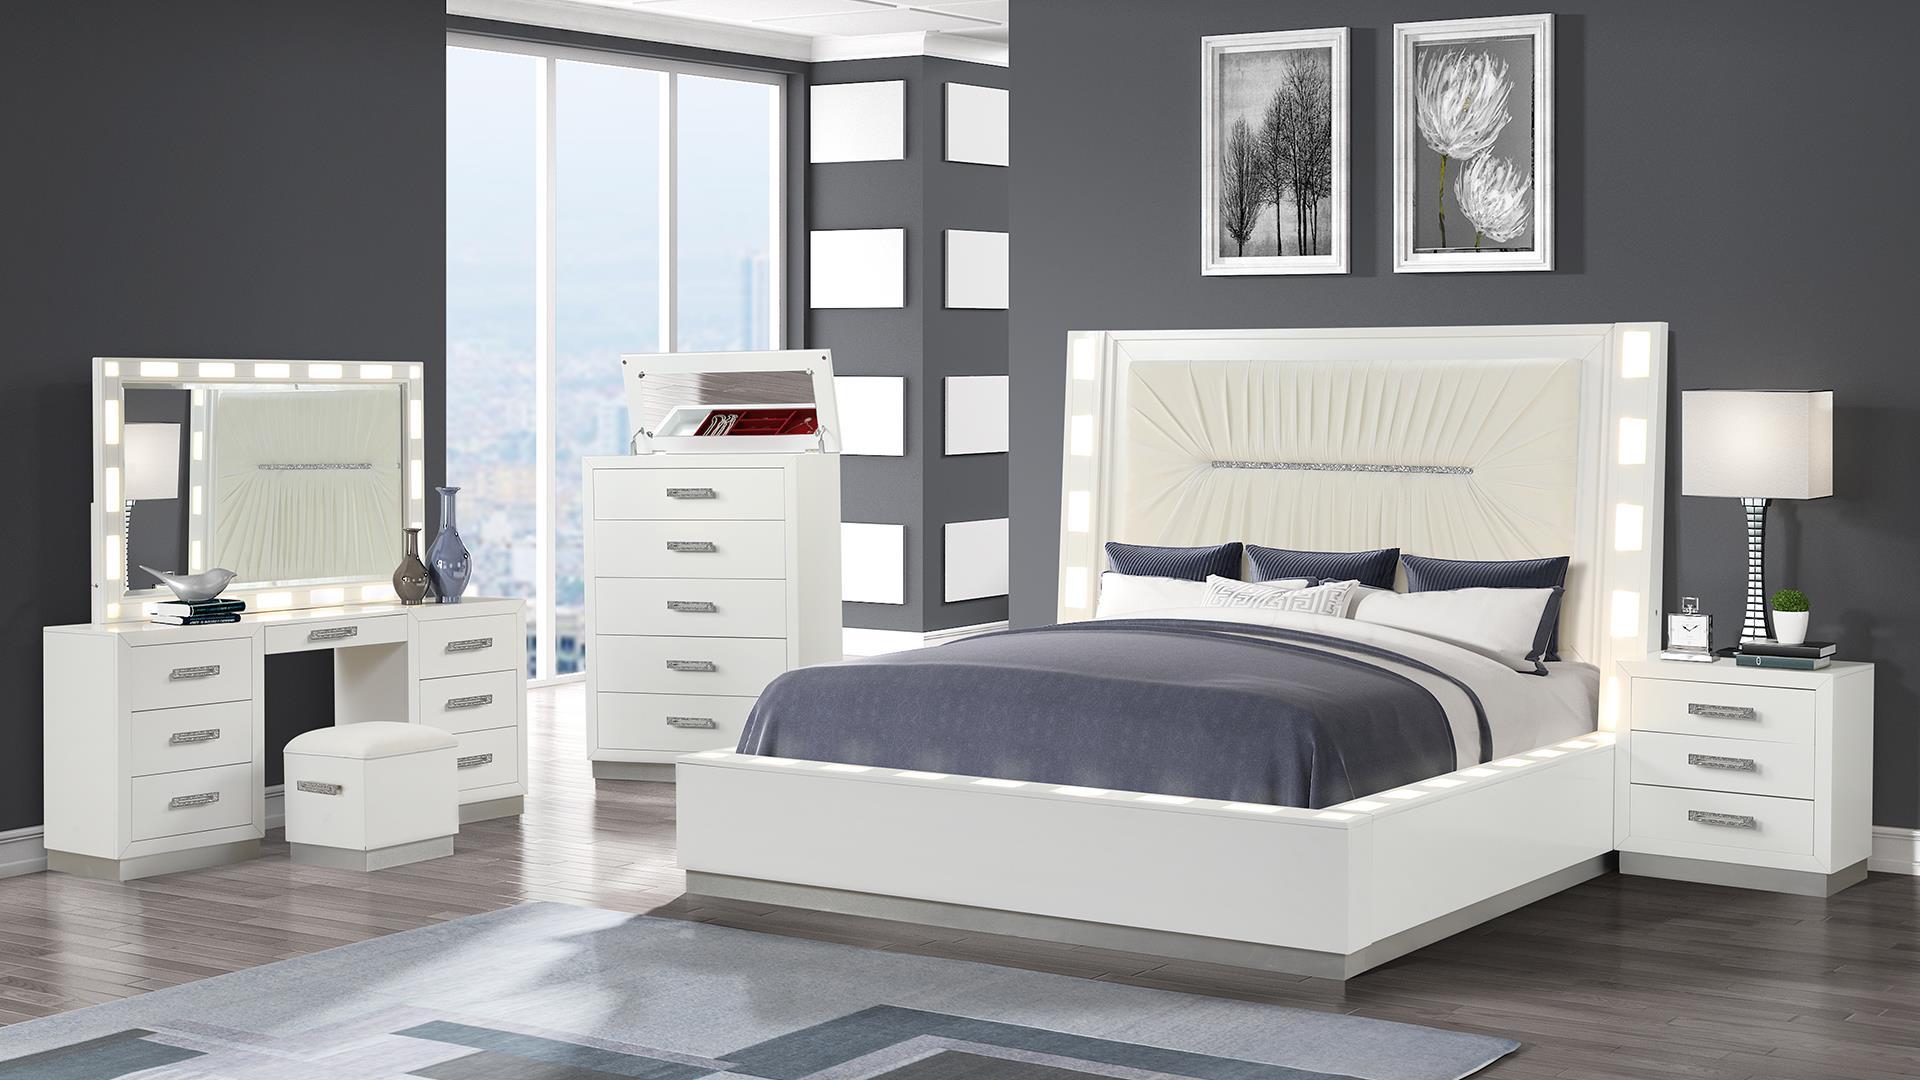 

    
Milky White Solid Wood Queen Bed w/Vanity Set 5Pcs COCO Galaxy Home Modern
